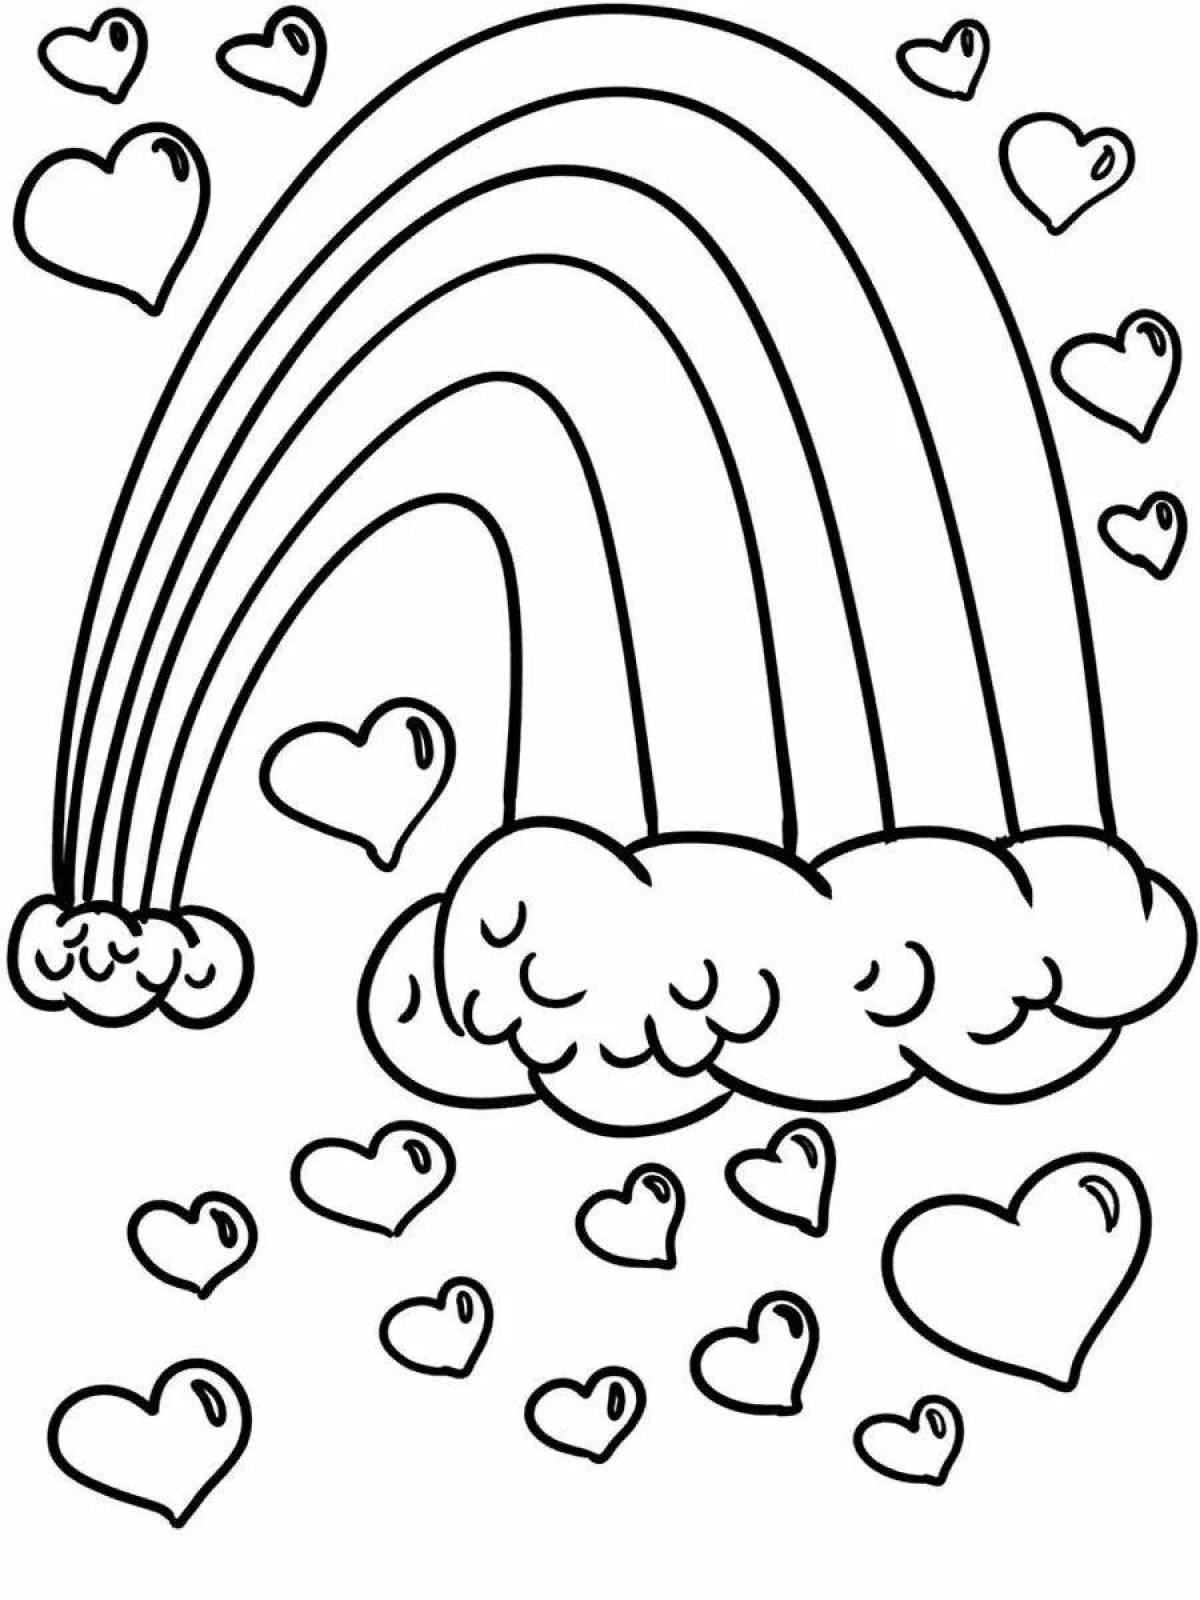 Glowing Rainbow Coloring Page for Kids